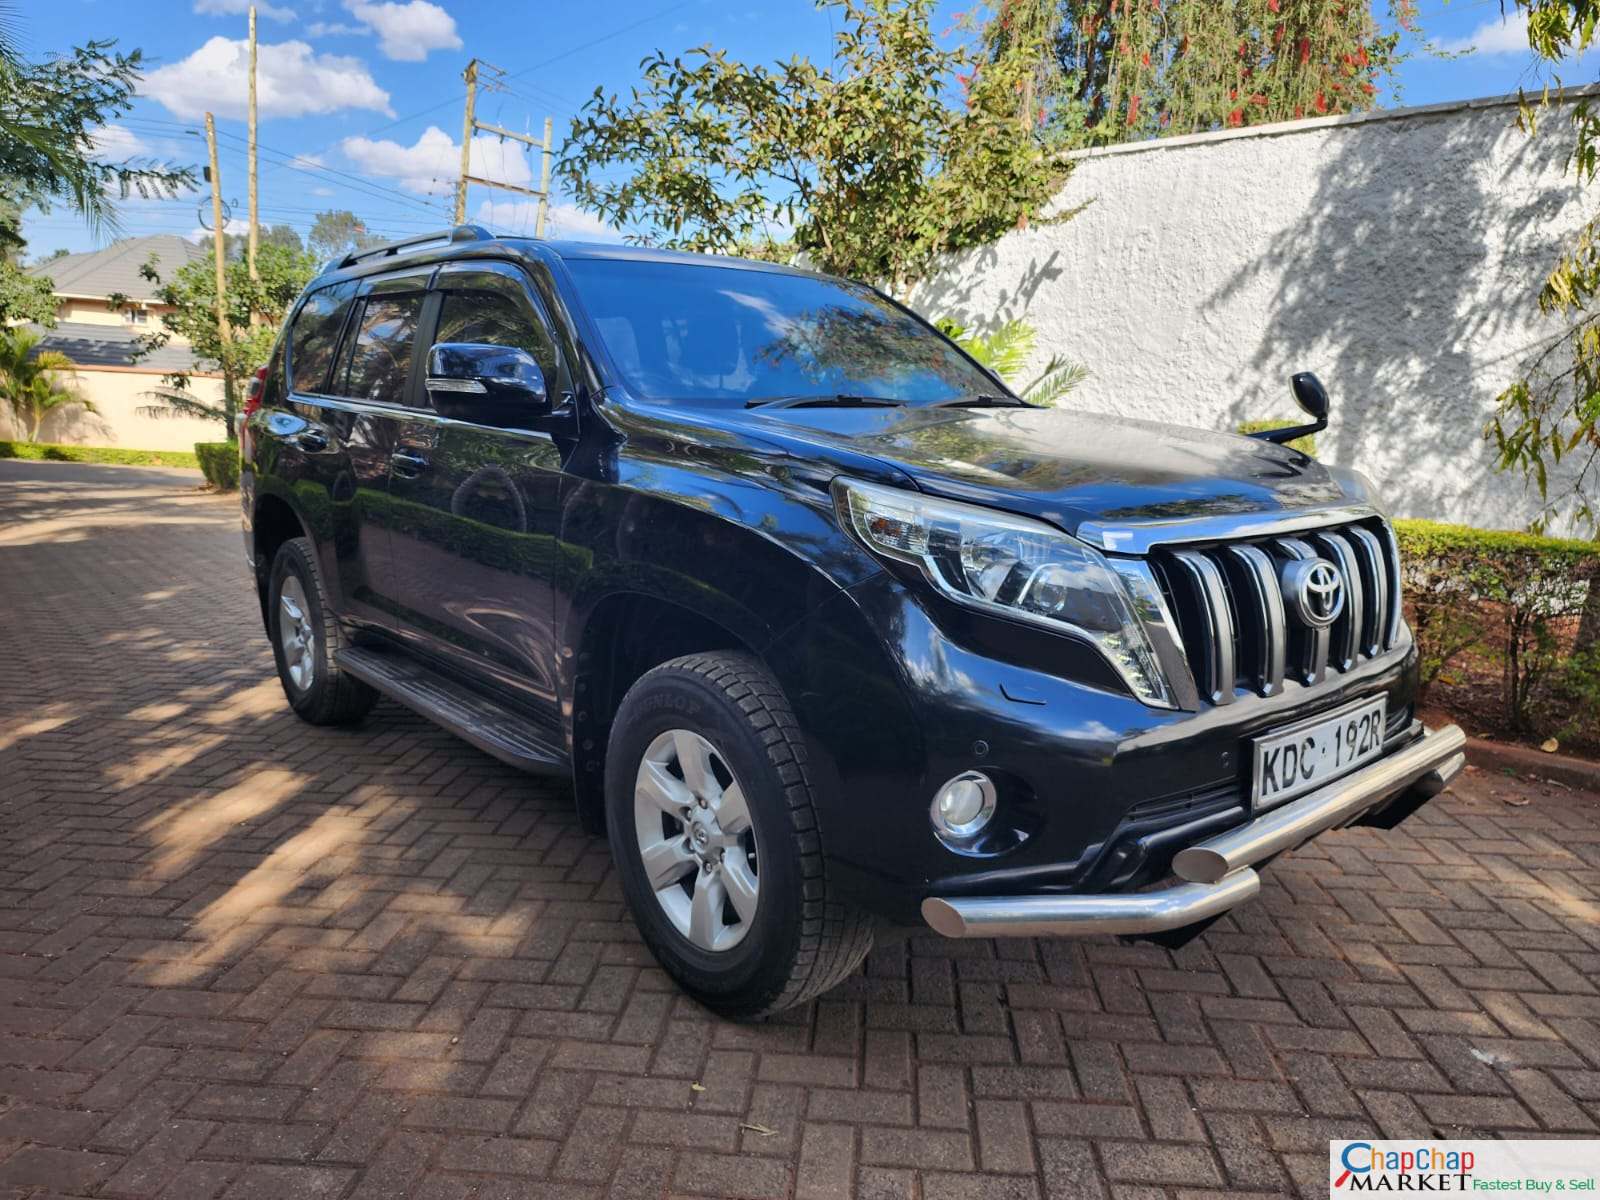 Toyota Prado j150 with SUNROOF You Pay 30% Deposit Trade in OK EXCLUSIVE Prado for sale in kenya hire purchase installments